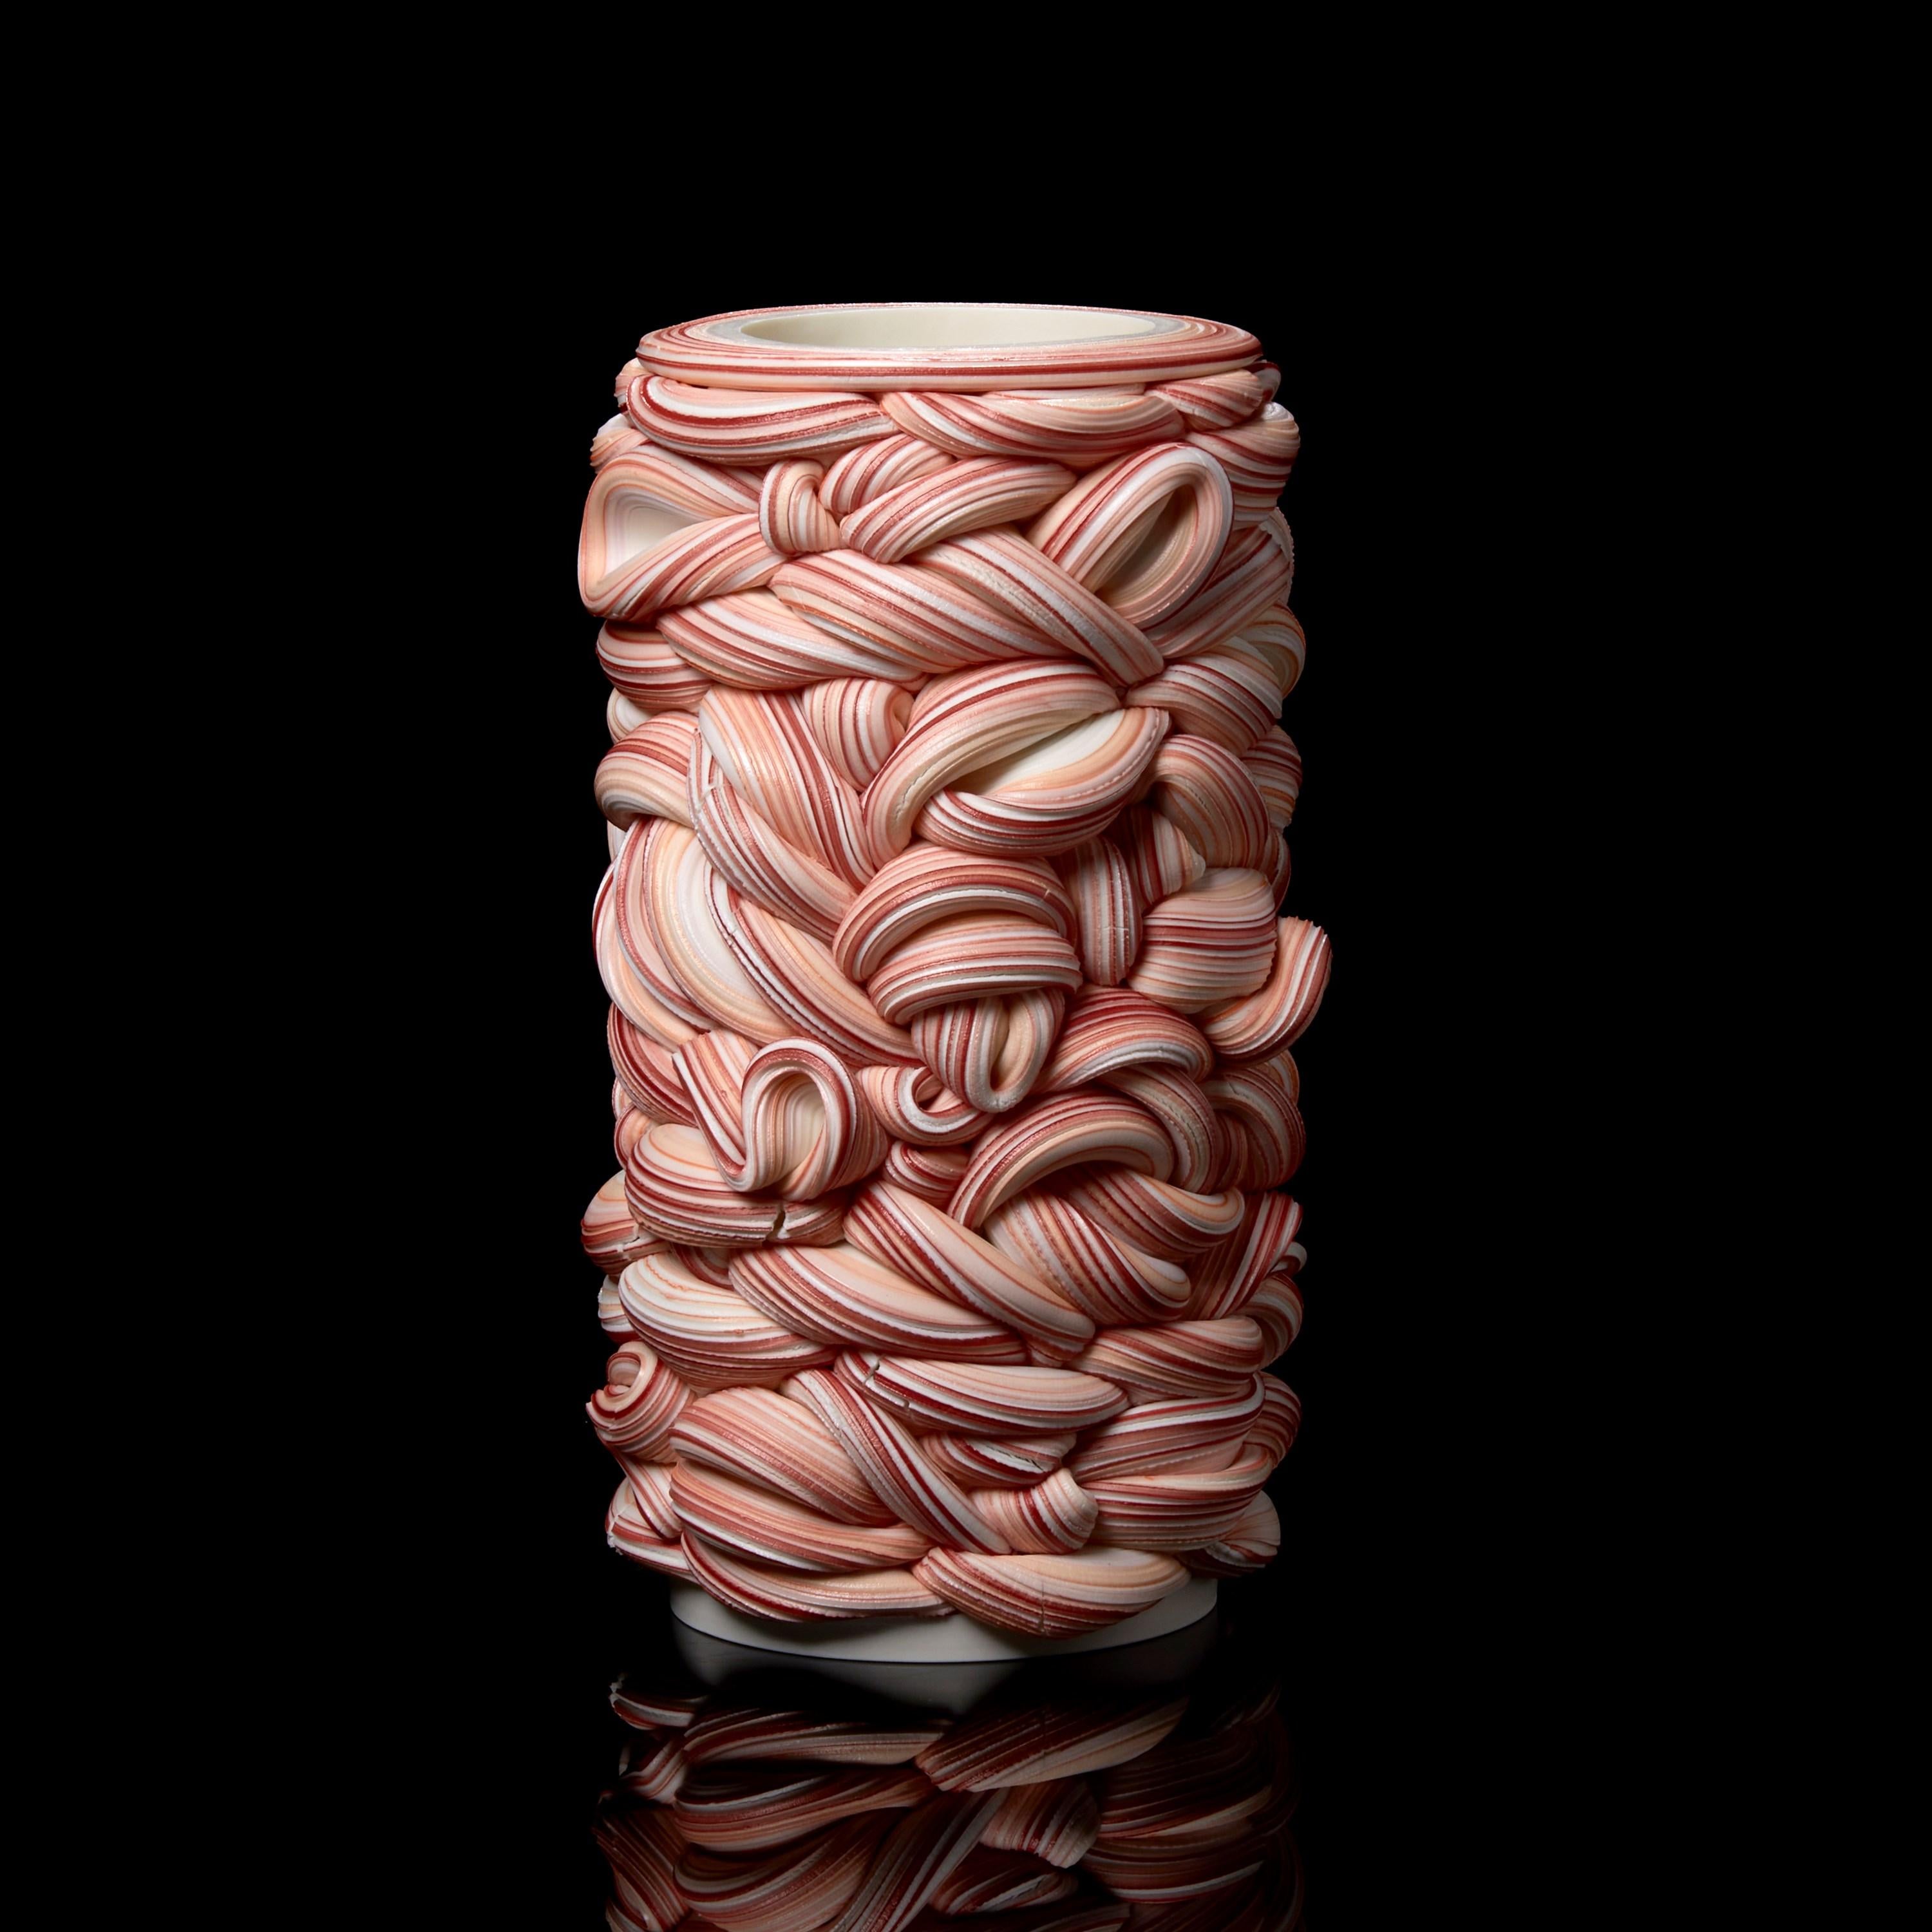 Hand-Crafted Banded Fold II, a Pink Parian Porcelain Sculptural Vessel by Steven Edwards